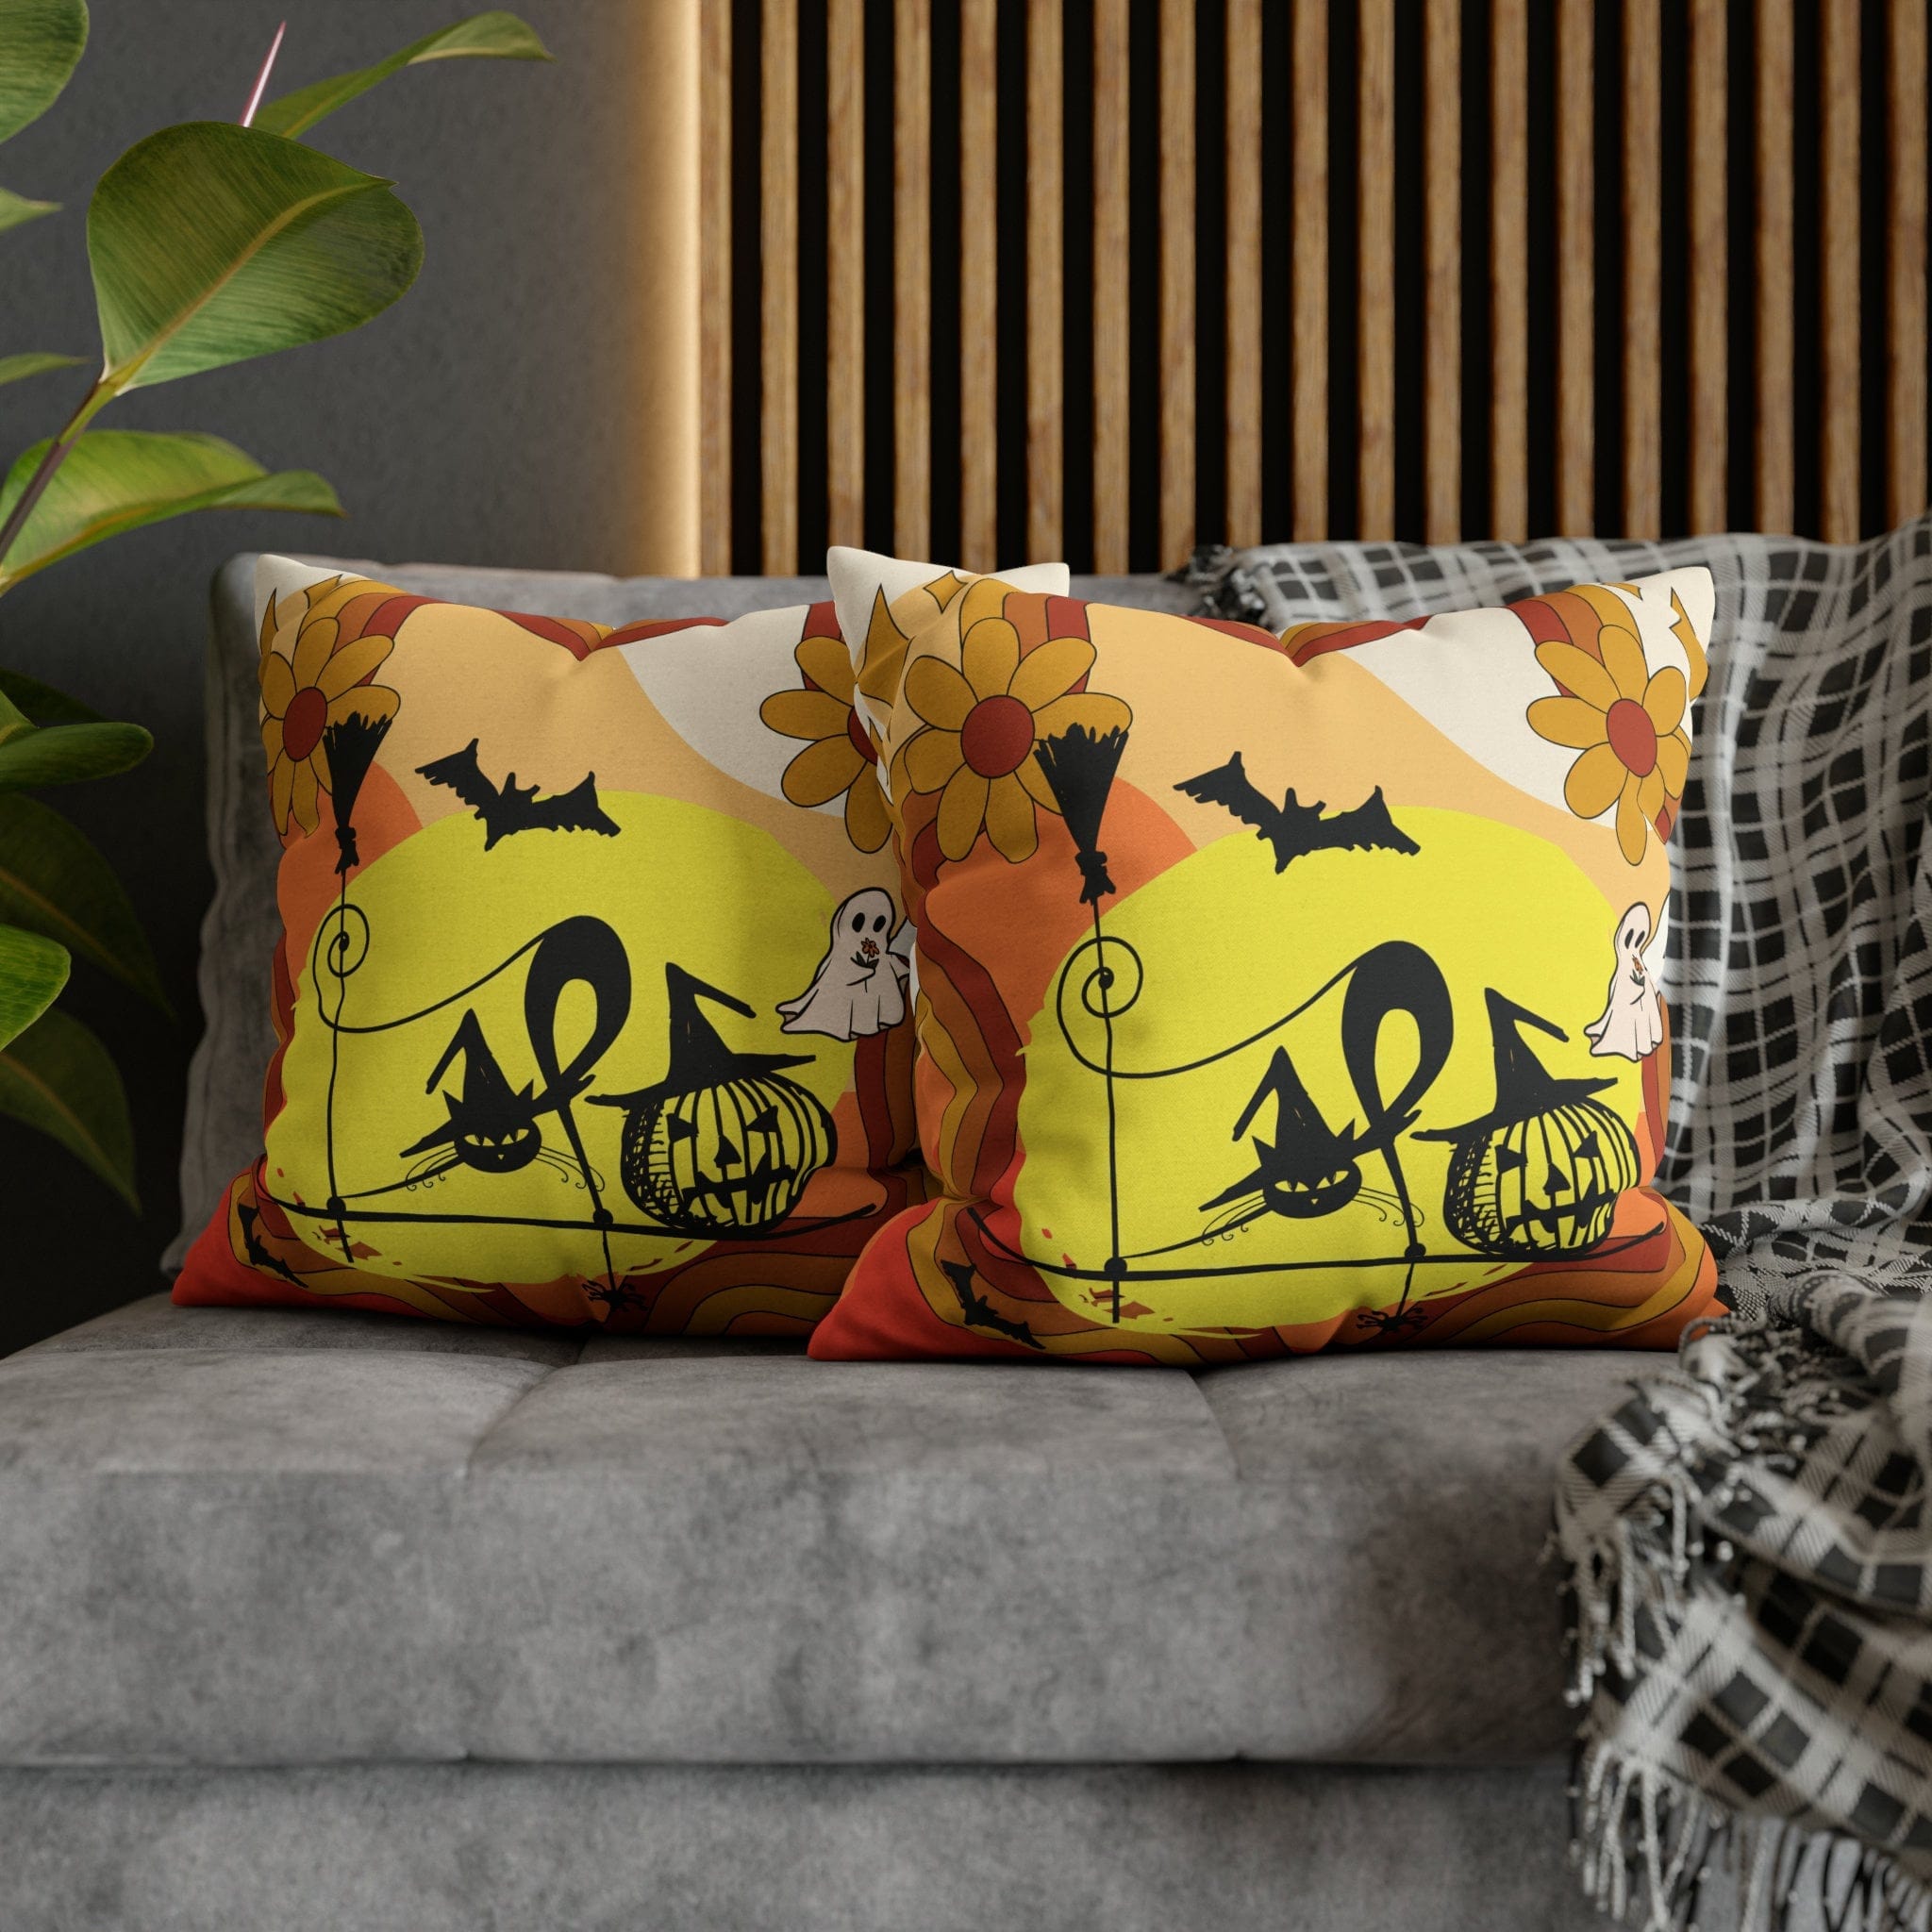 Kate McEnroe New York Atomic Kitschy Cat Halloween Pillow Cover, Retro Pumpkin, Bat Ghost Floral Holiday Cushion Covers, MCM Pillow Case Throw Pillow Covers